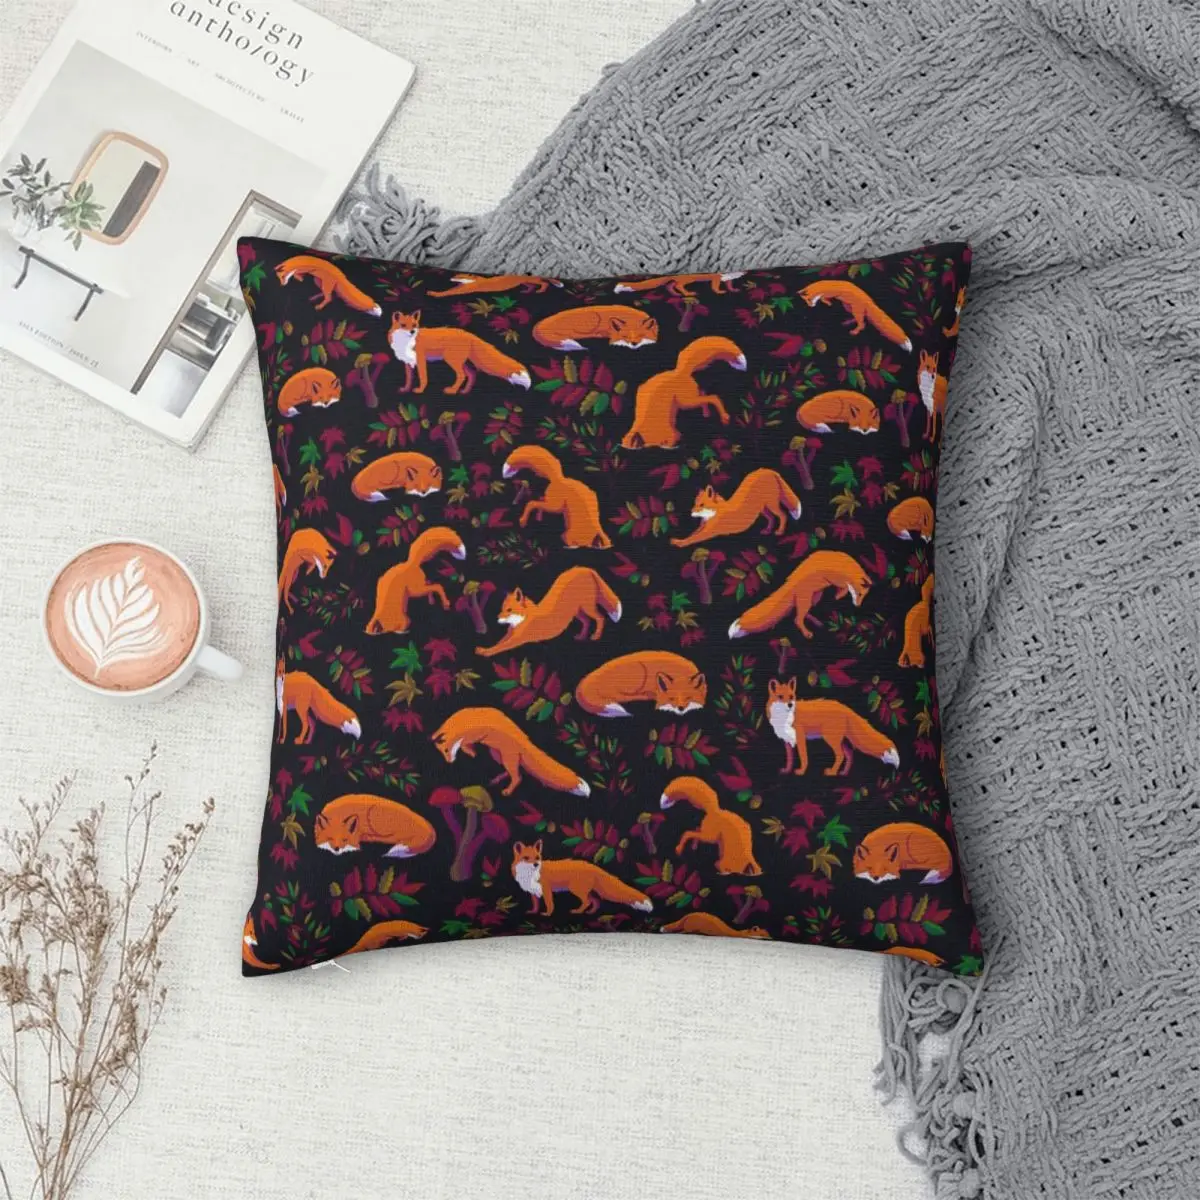 

Forest Fox Pillowcase Polyester Pillows Cover Cushion Comfort Throw Pillow Sofa Decorative Cushions Used for Bedroom Living Room